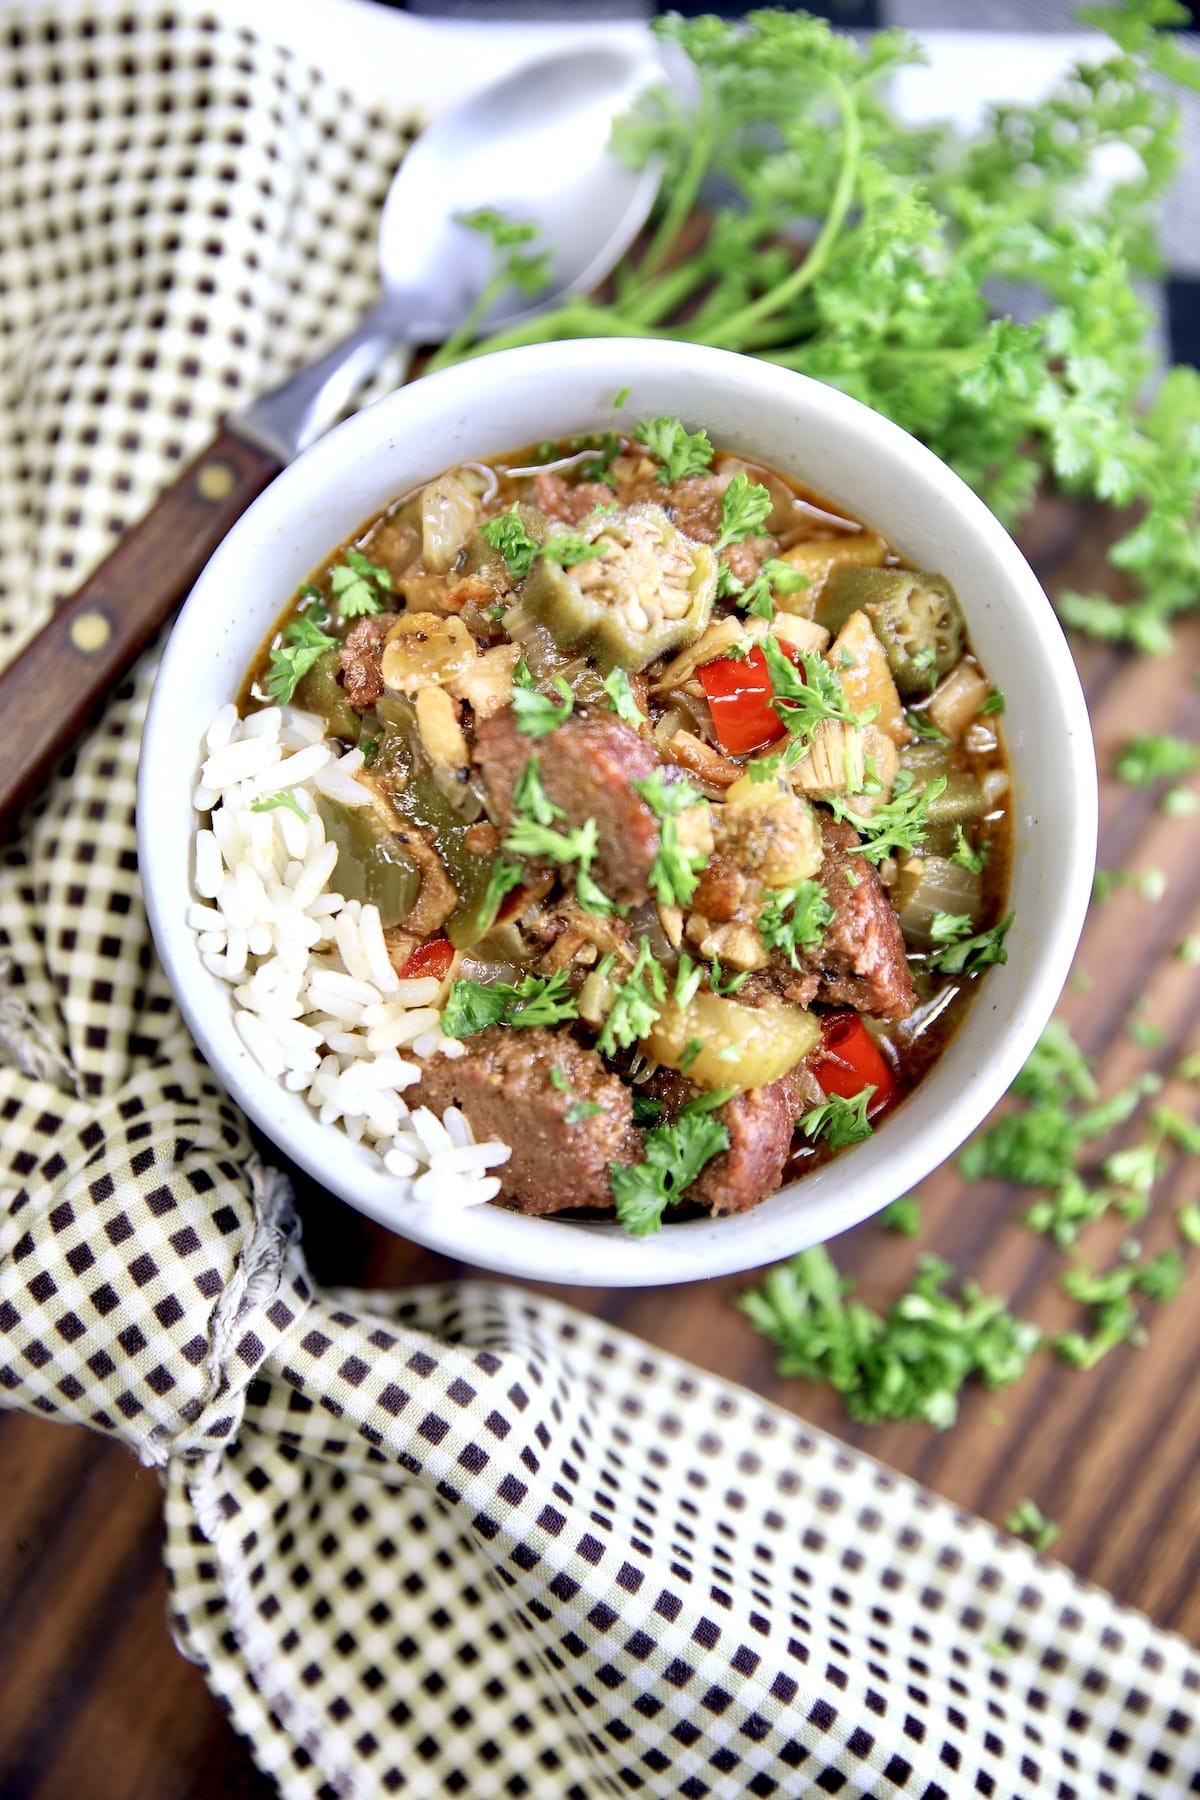 Bowl of gumbo with rice.